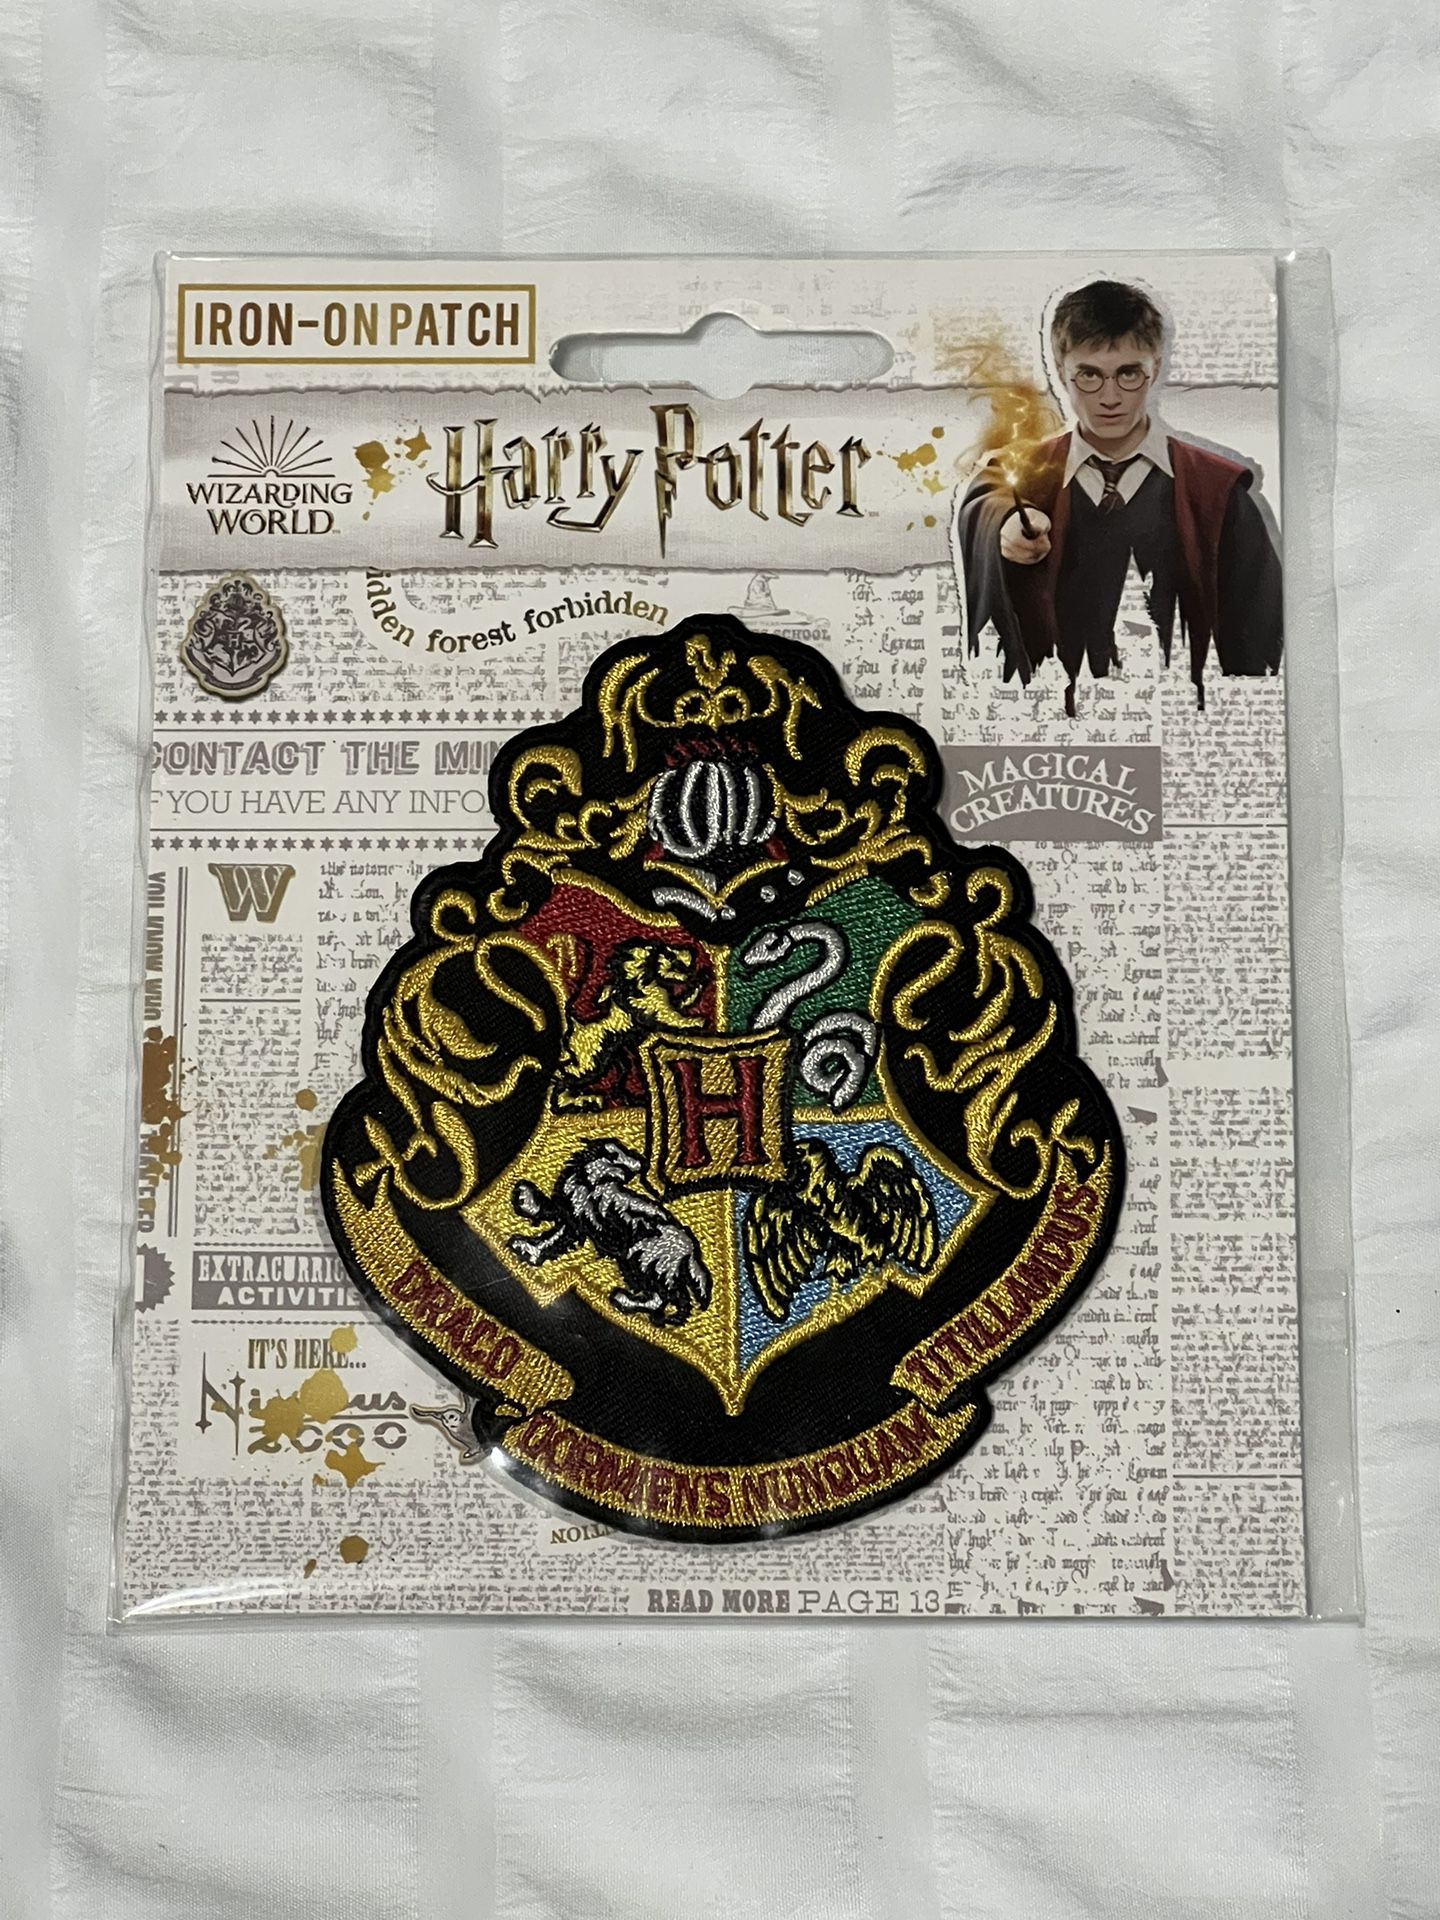 Harry Potter Iron-on Patch